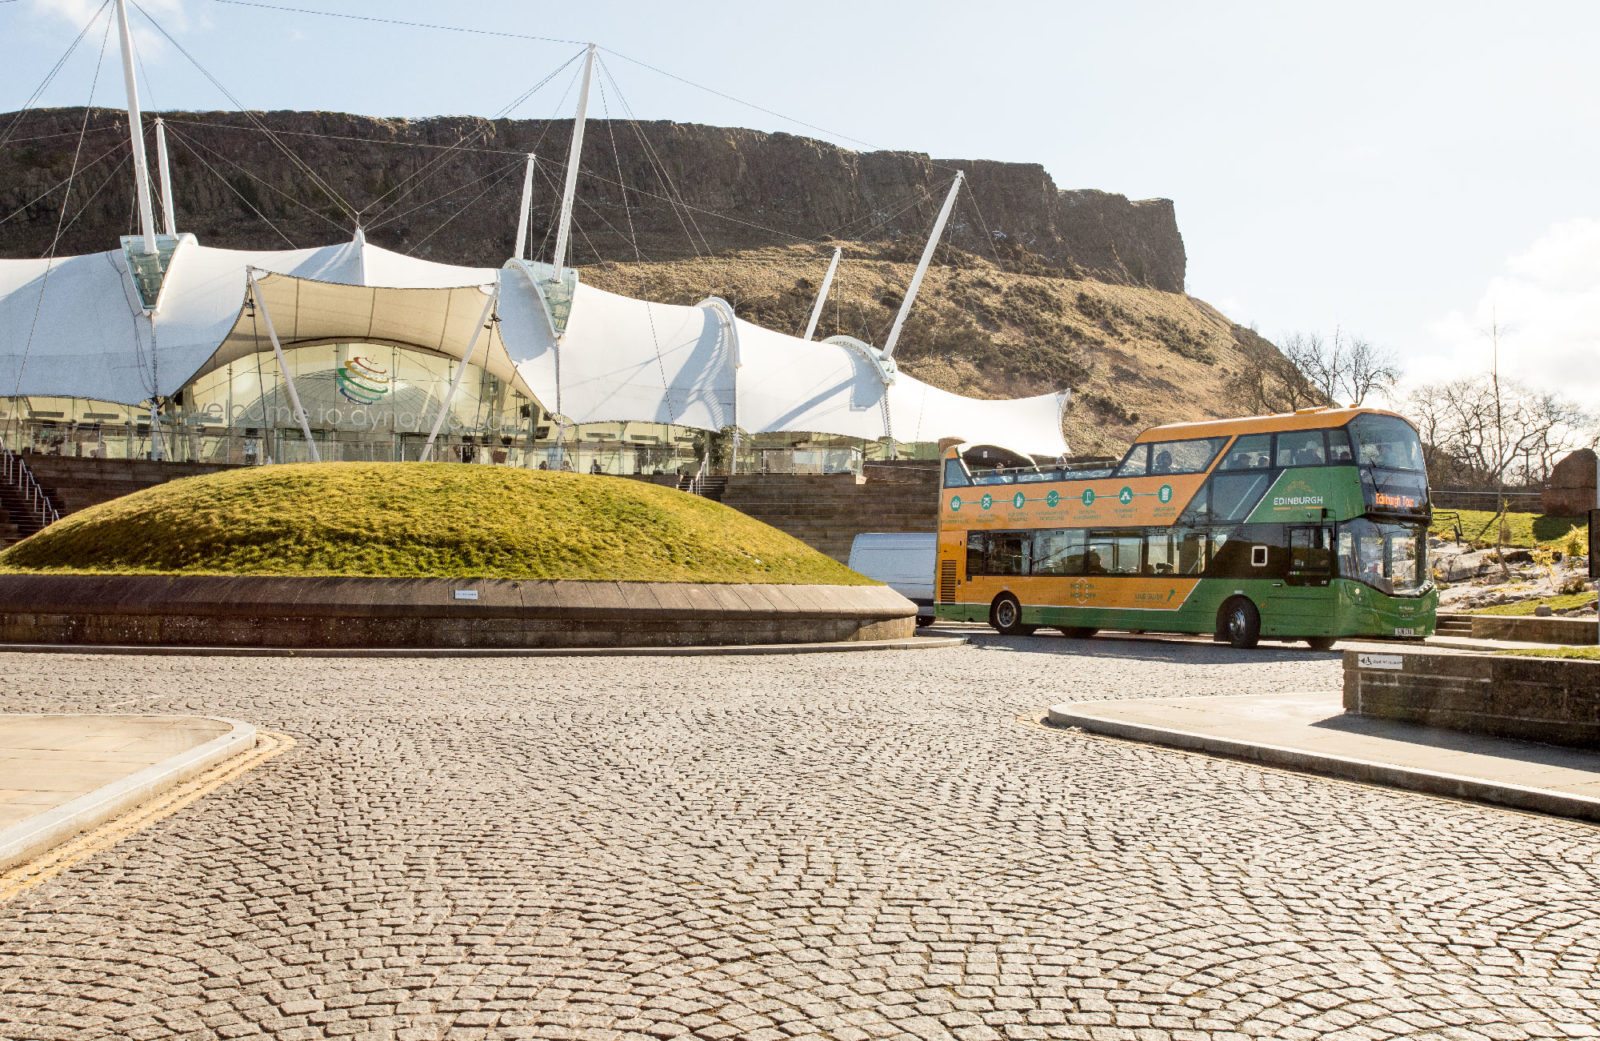 Edinburgh Tour Bus on the foreground with Arthur's Seat in the background